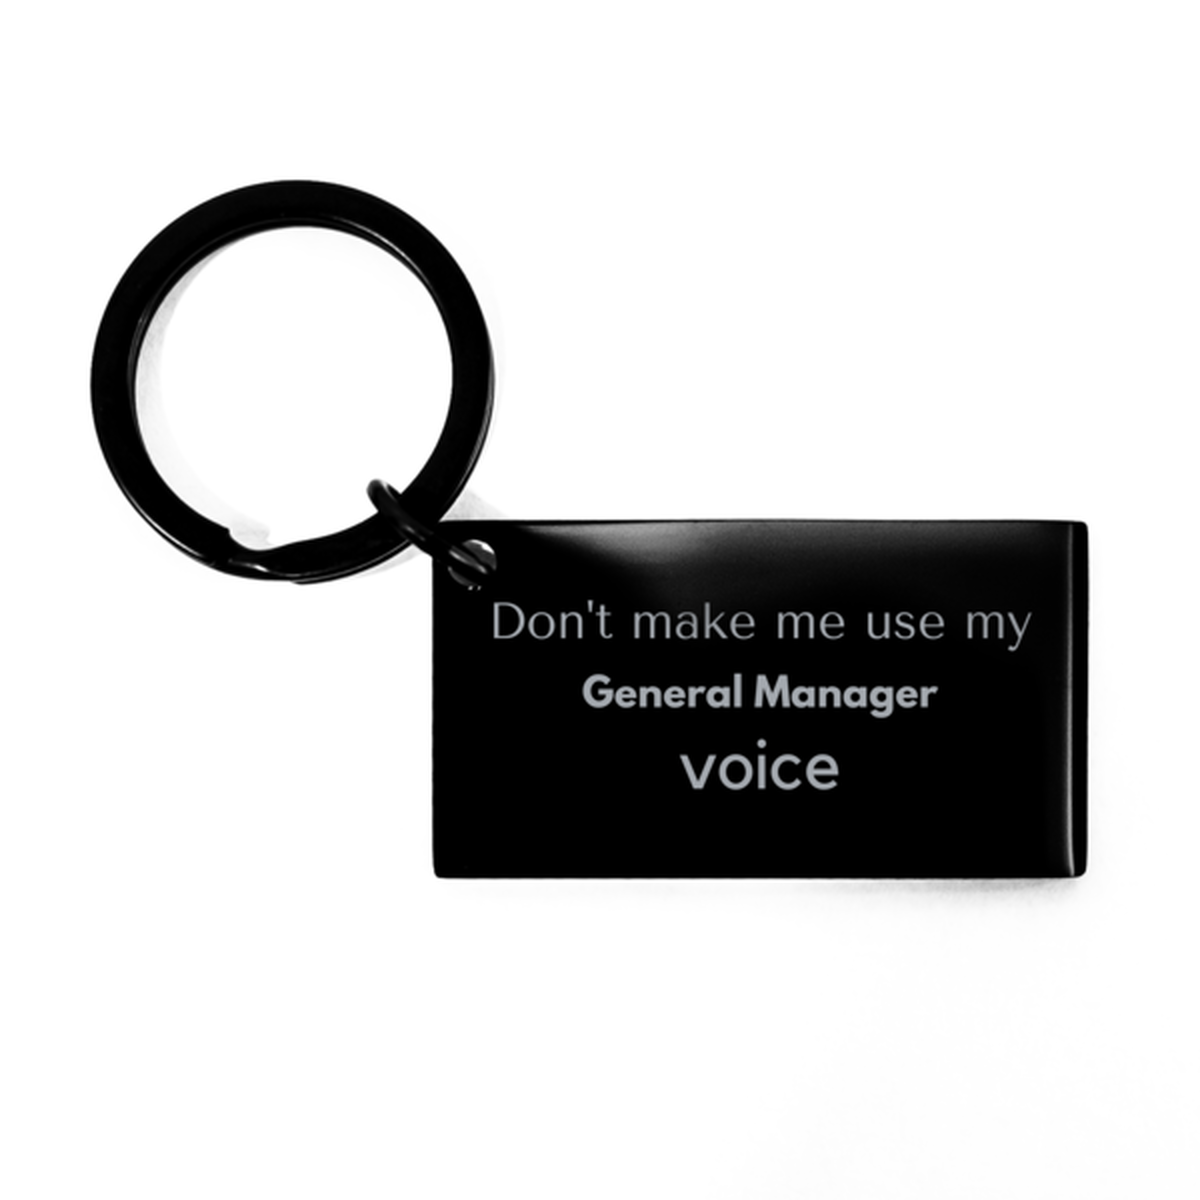 Don't make me use my General Manager voice, Sarcasm General Manager Gifts, Christmas General Manager Keychain Birthday Unique Gifts For General Manager Coworkers, Men, Women, Colleague, Friends